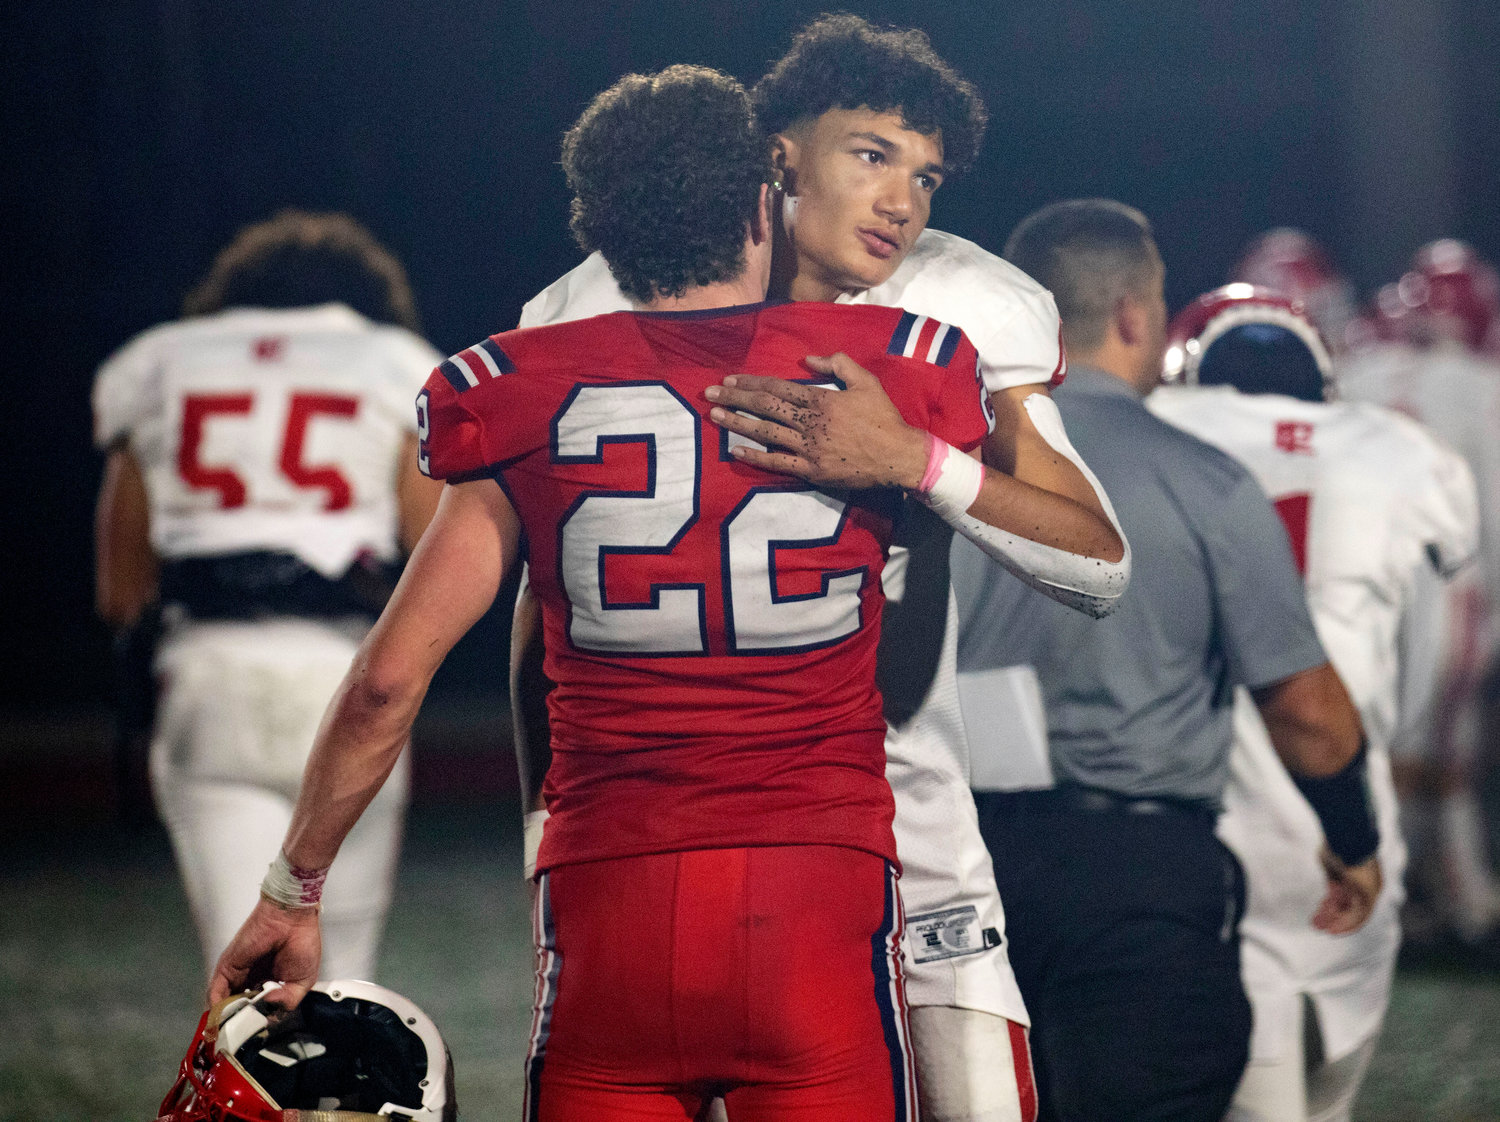 Portsmouth linebacker Dylan Brandariz, who terrorized the townies on defense, connects with Townies quarterback Maxwell Whiting after the game.